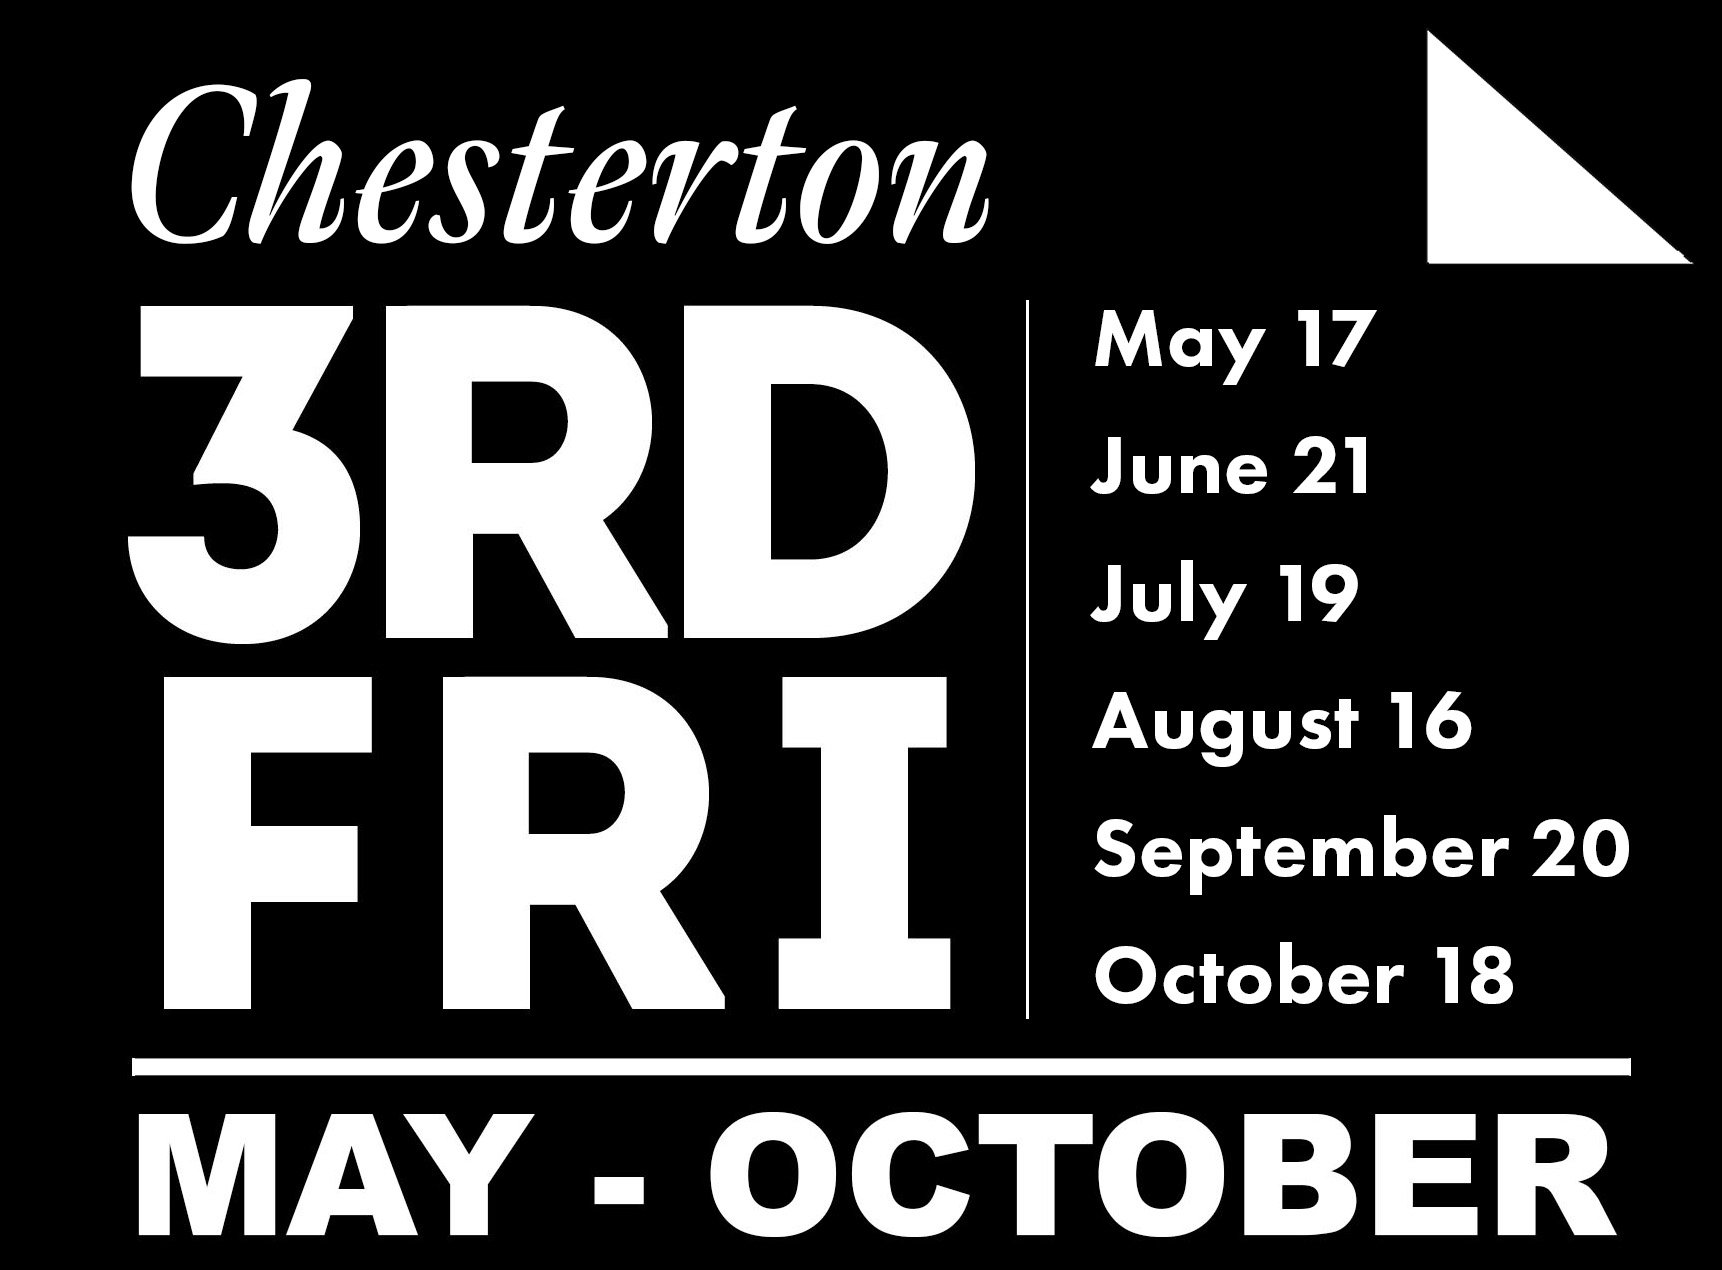 Tomorrow is the big day--Chesterton Third Friday! Join us and all of our amazing neighbors for an evening of art, shopping, dining, drinking, and more kicking off at 4PM! 

We'll be hosting receptions for our two May exhibits along with delicious lig